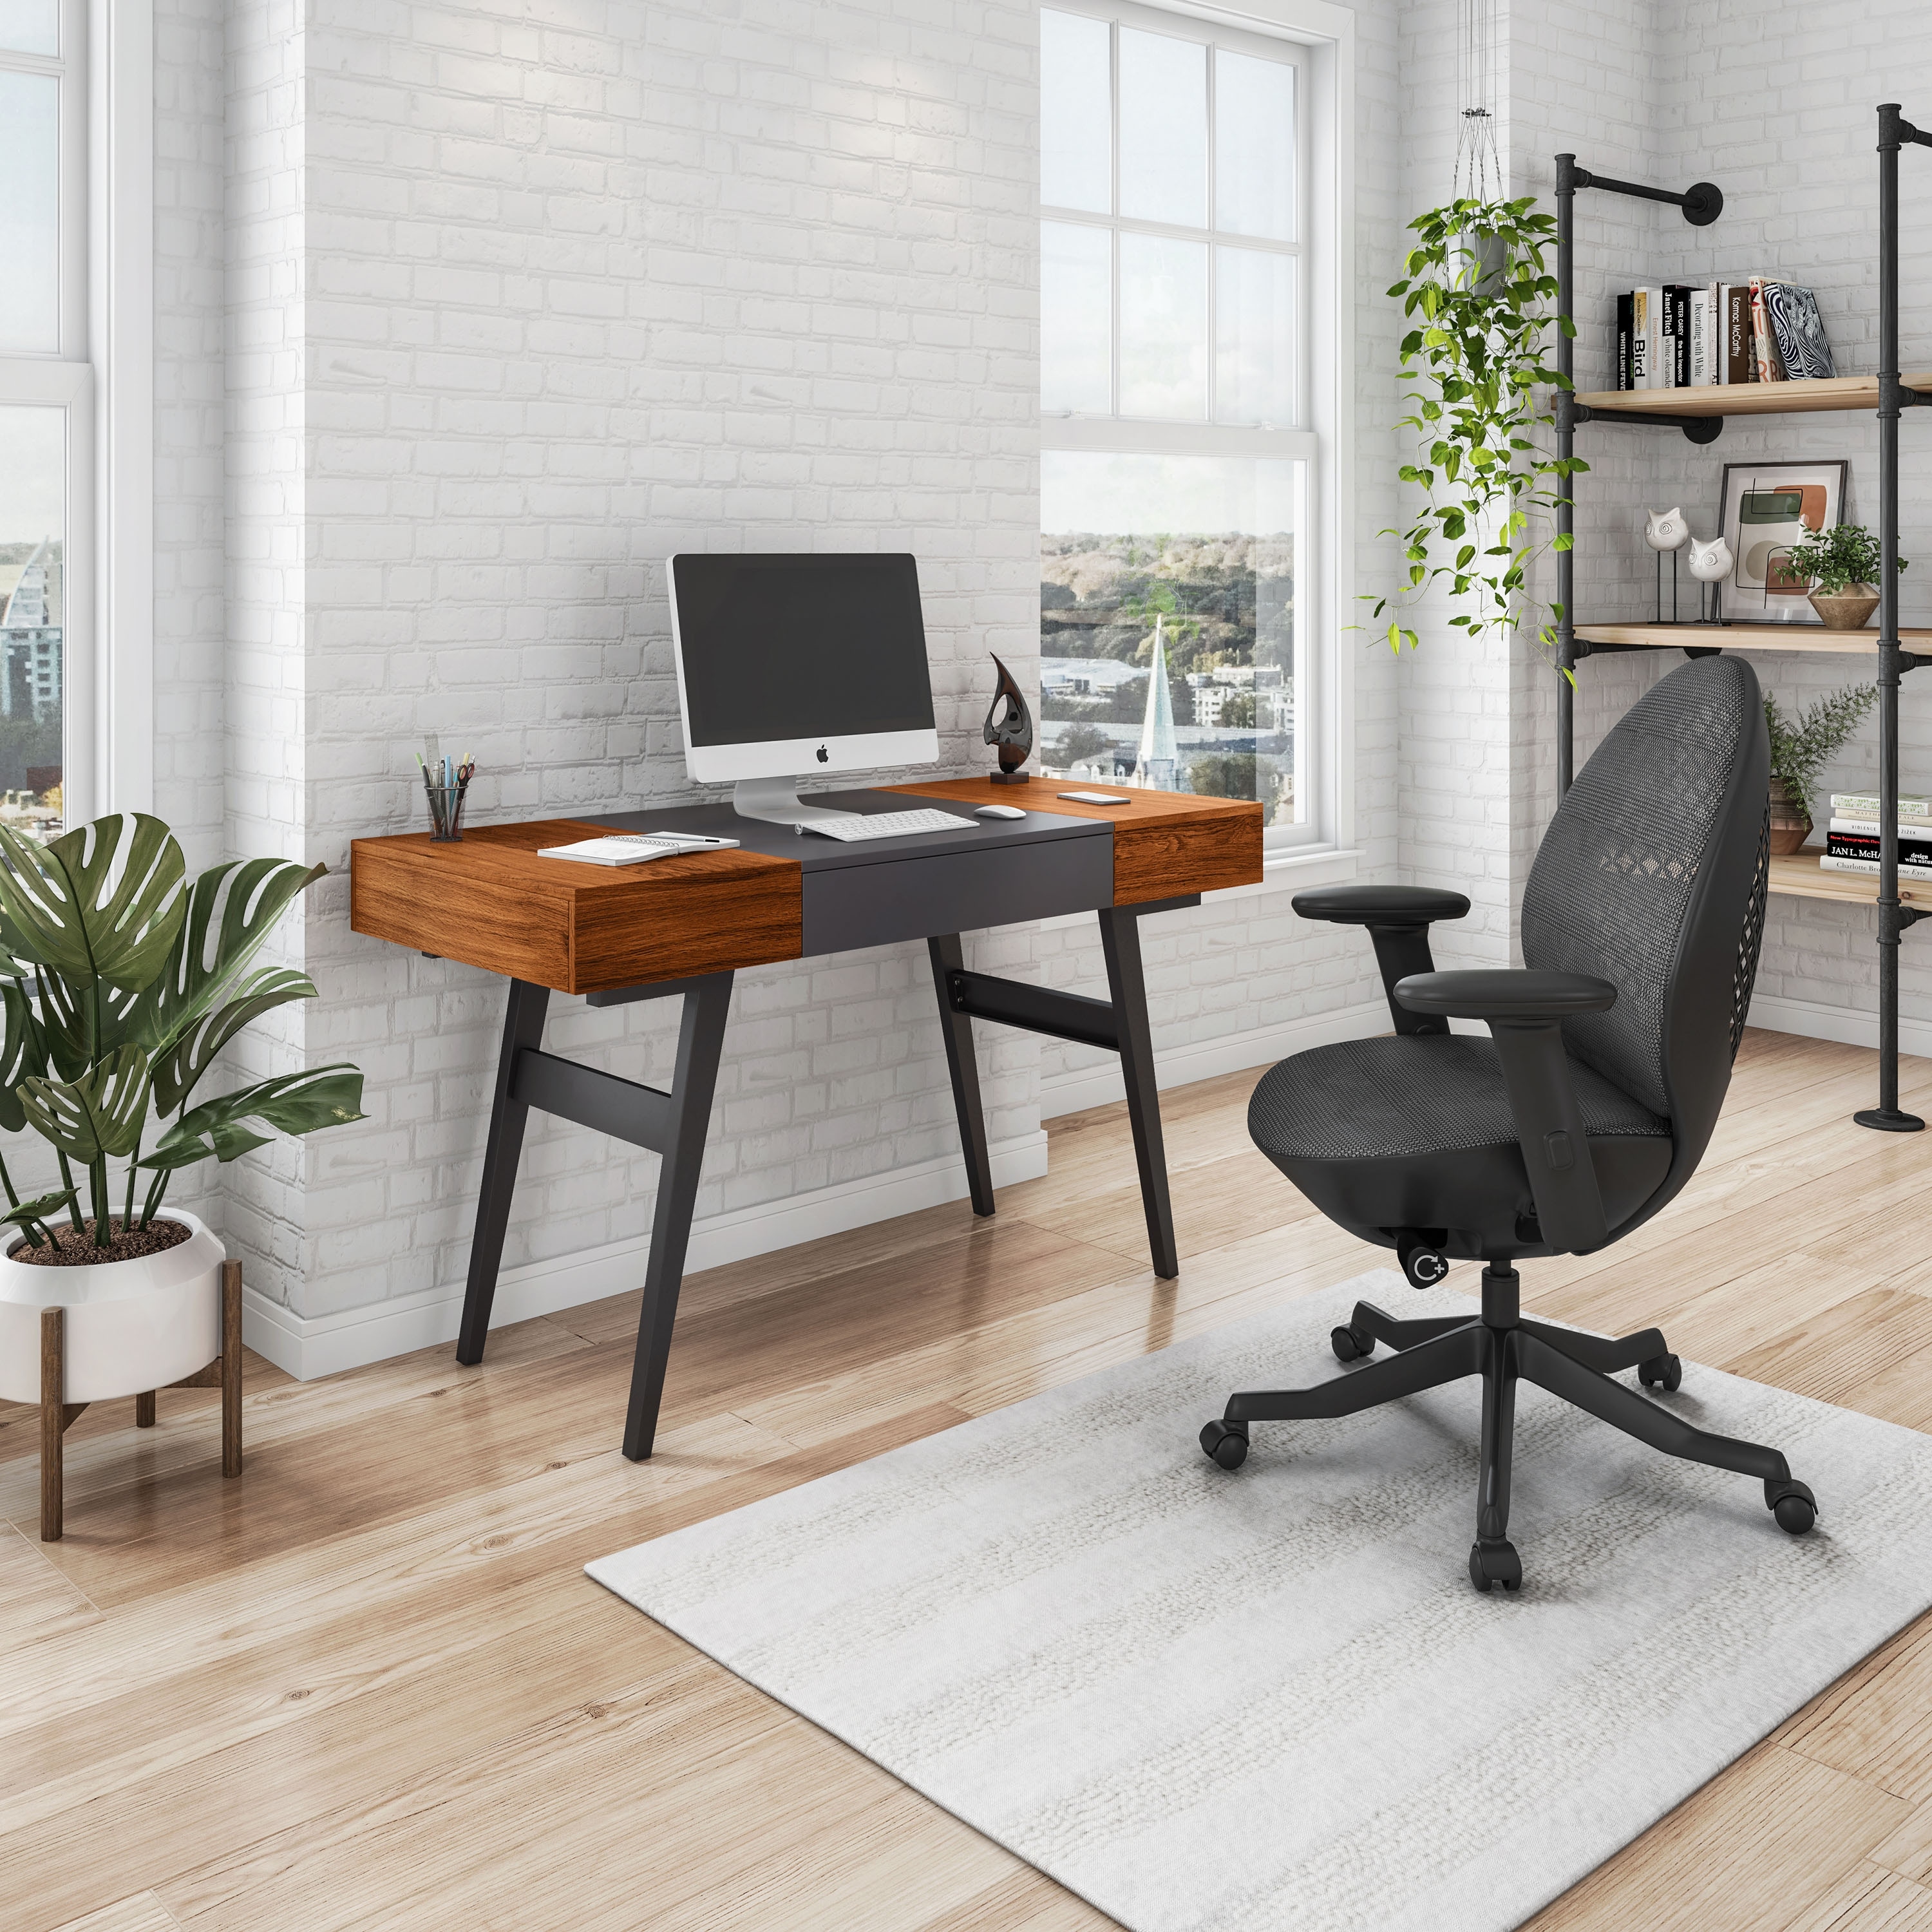 Wooden Office Table Work Service, With Storage